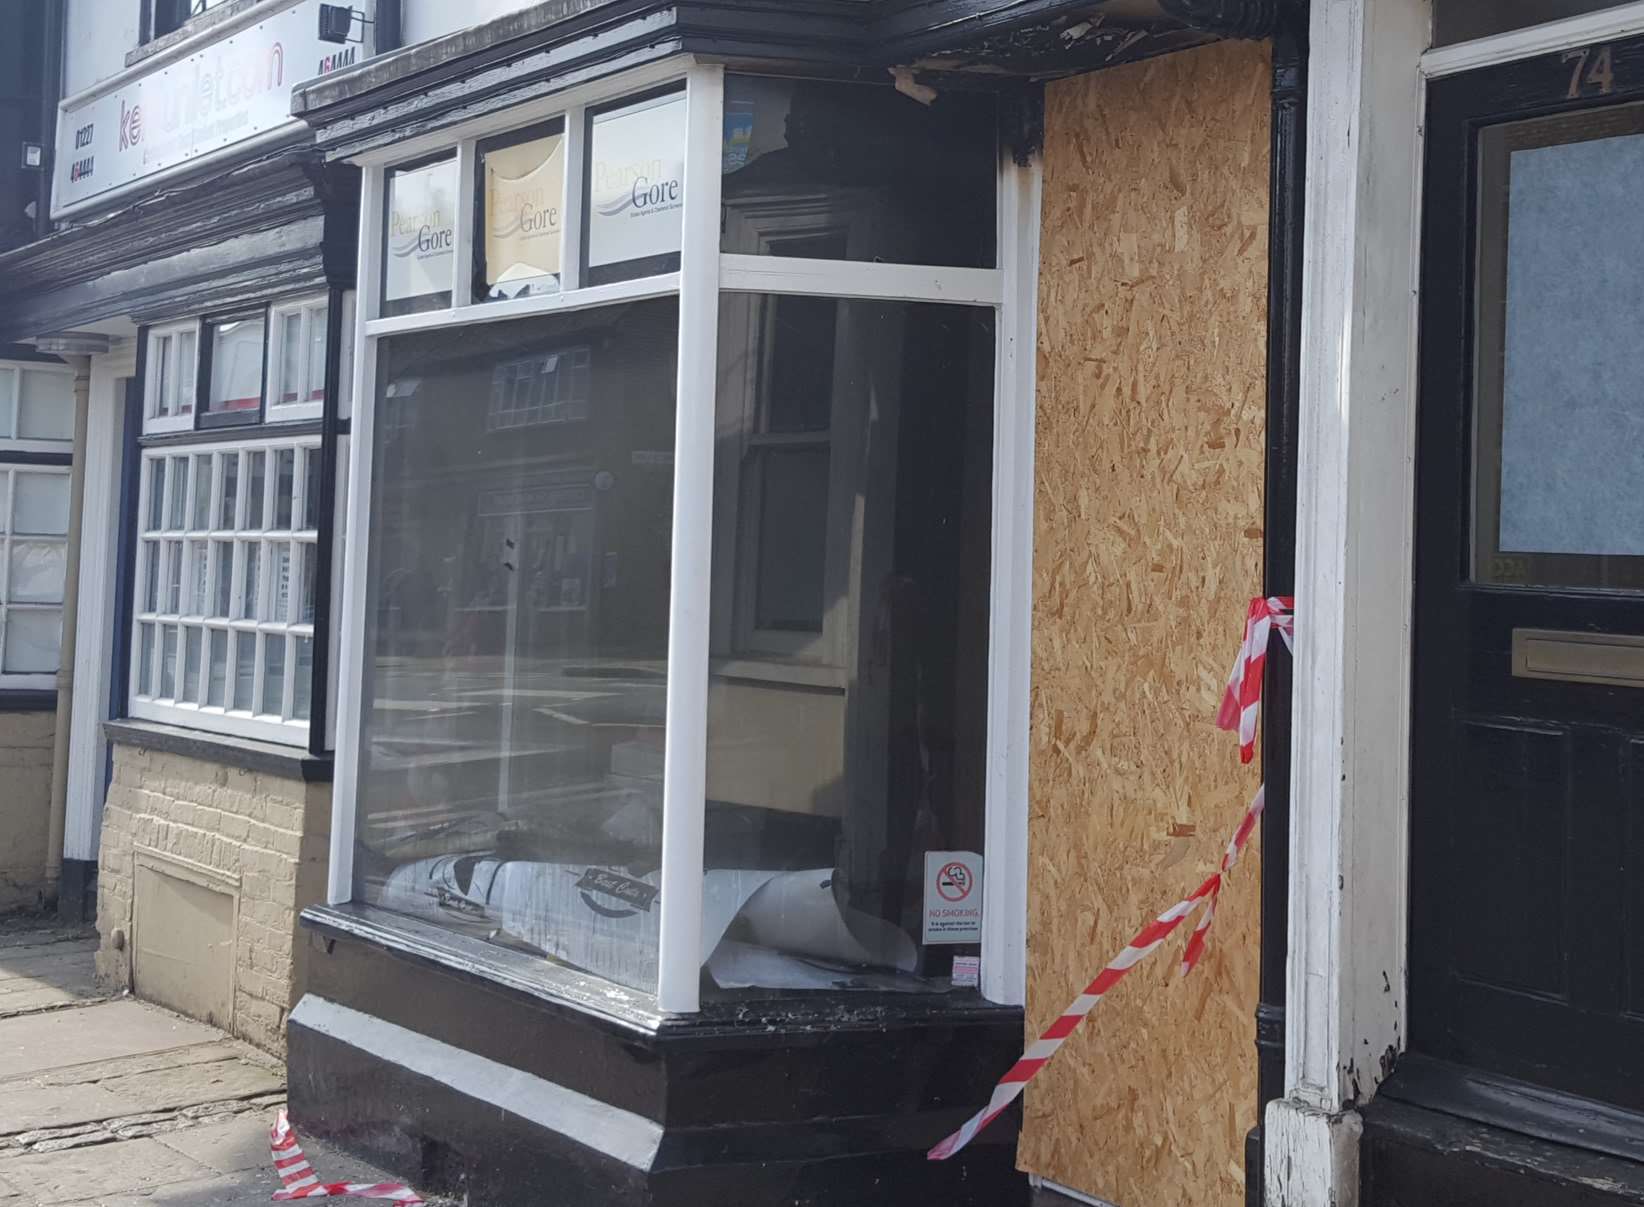 The fire-damaged shop was previously an estate agents